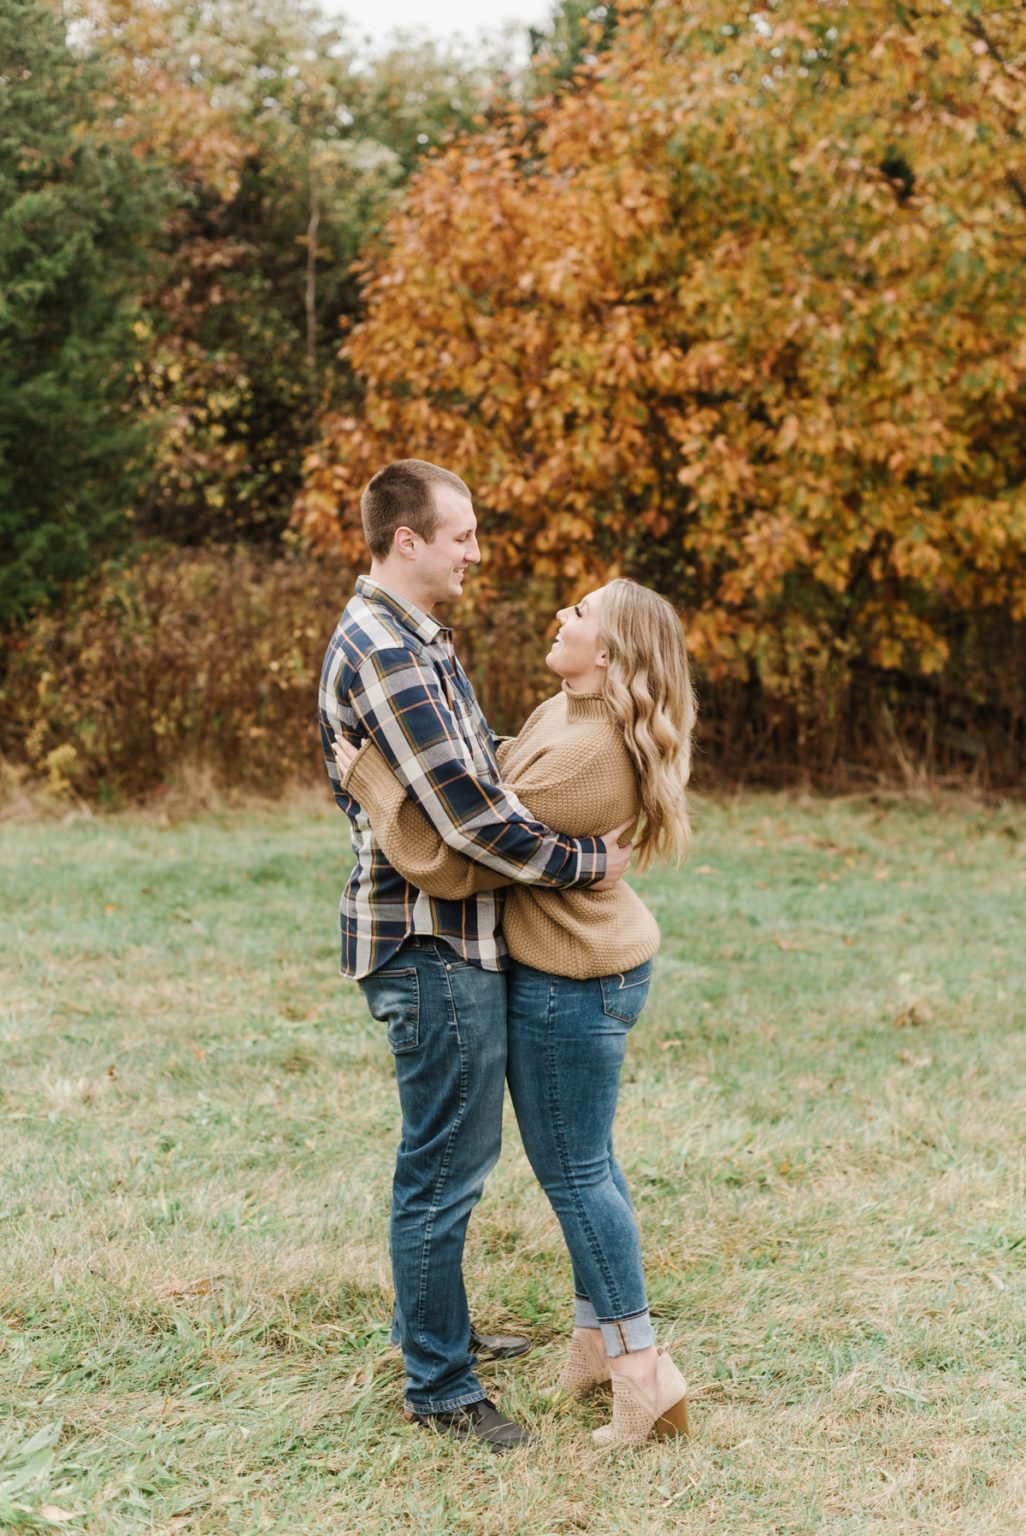 Smolak Farms Engagement Session | Sarah & Mike - Annmarie Swift Photography